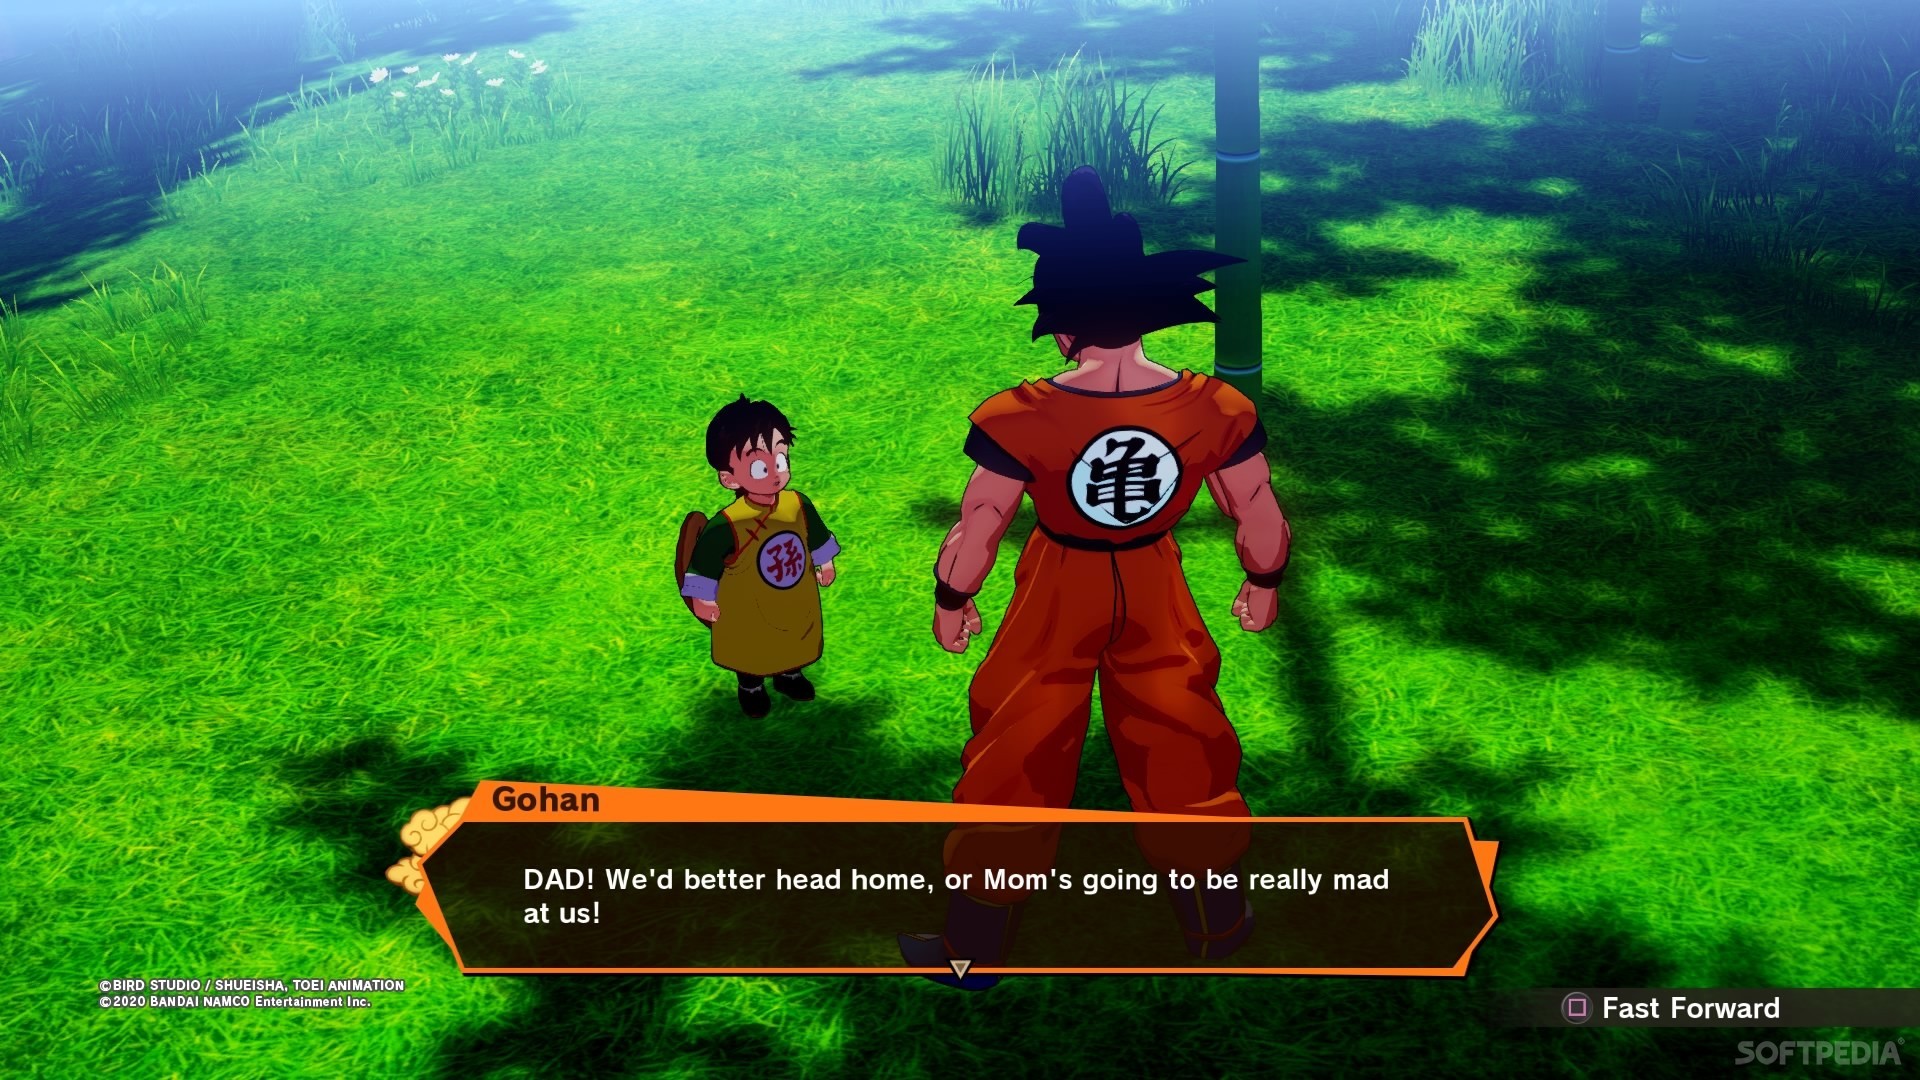 Dragon ball Z: The Adventure Game Review 